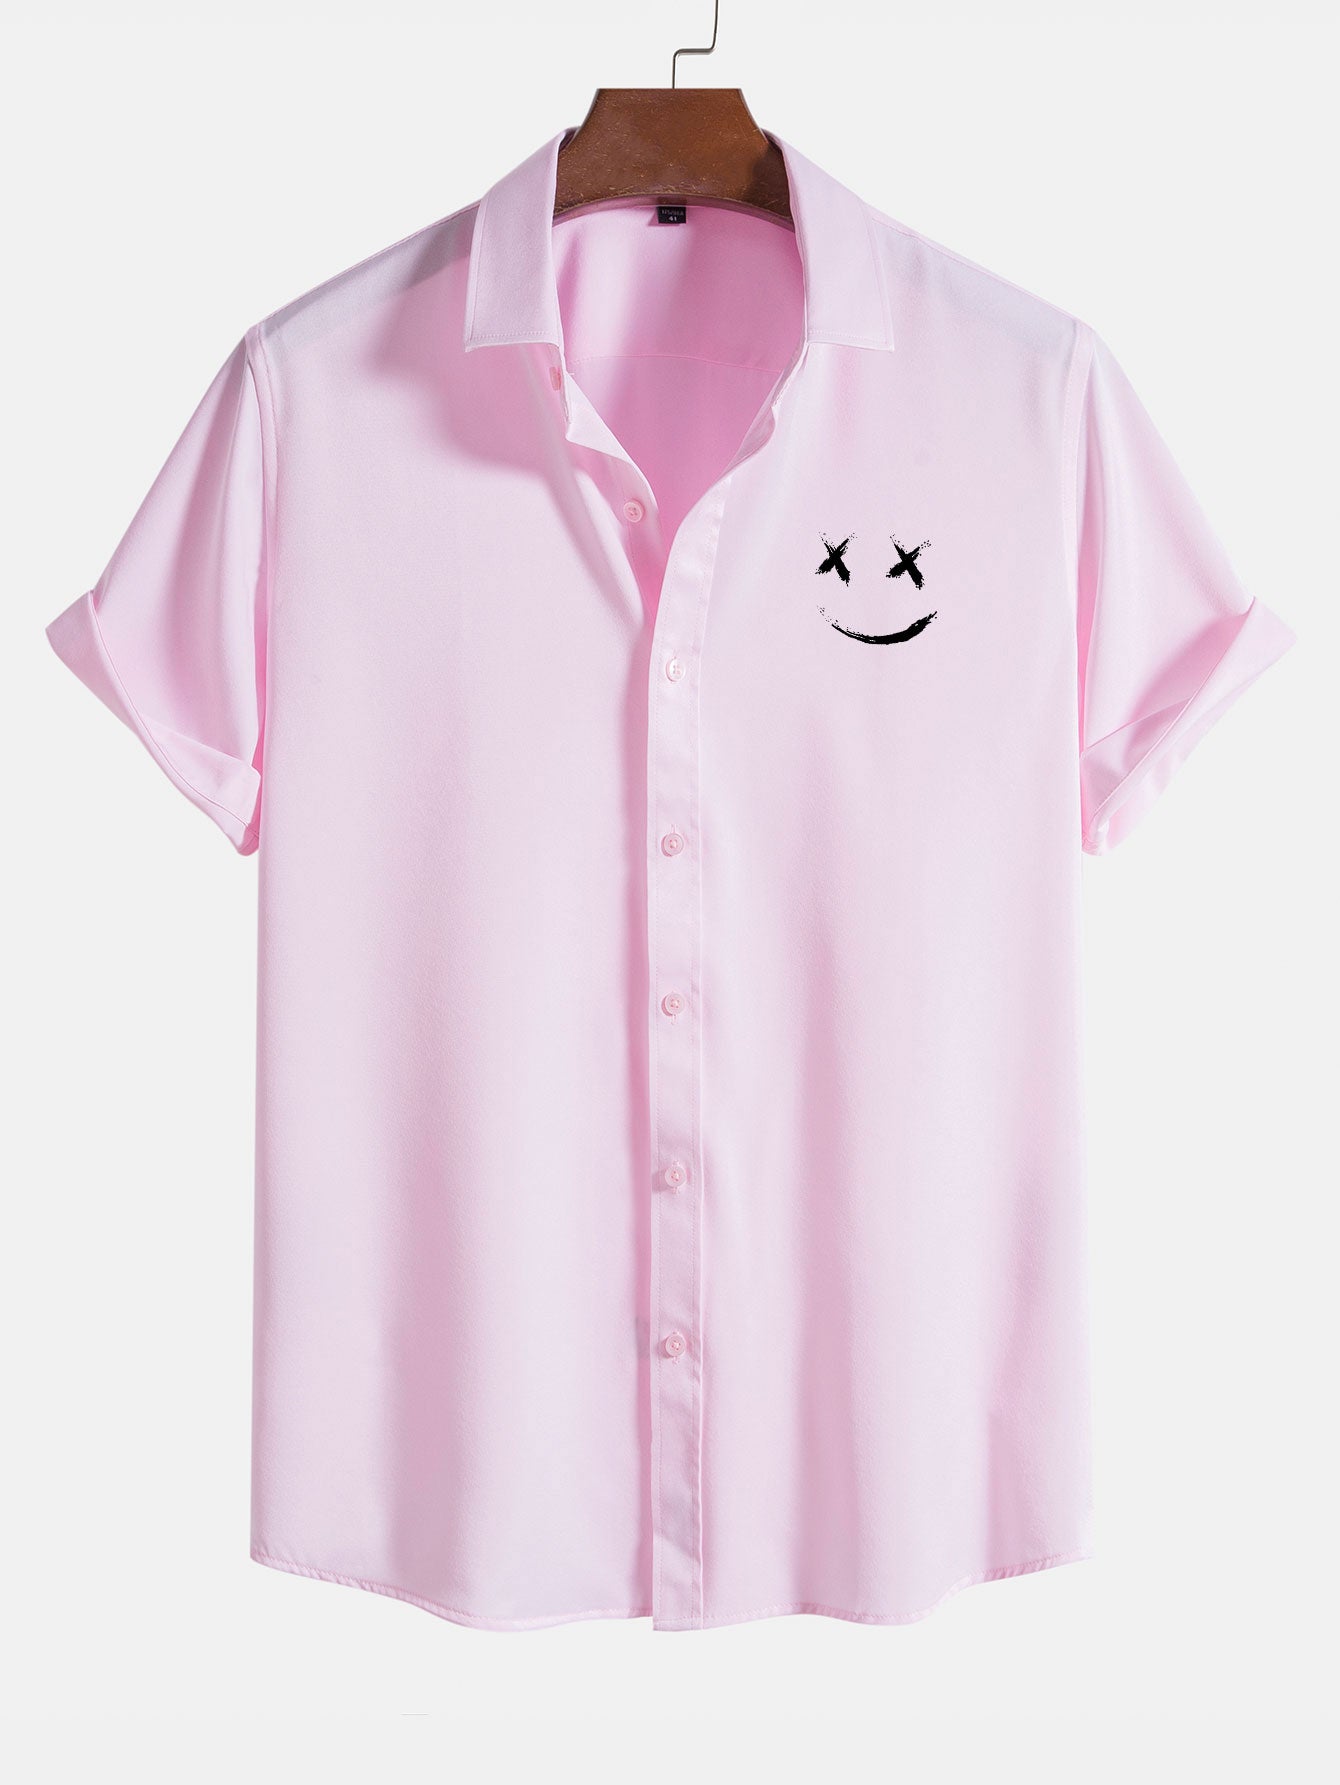 Smile Face Graphic Shirts